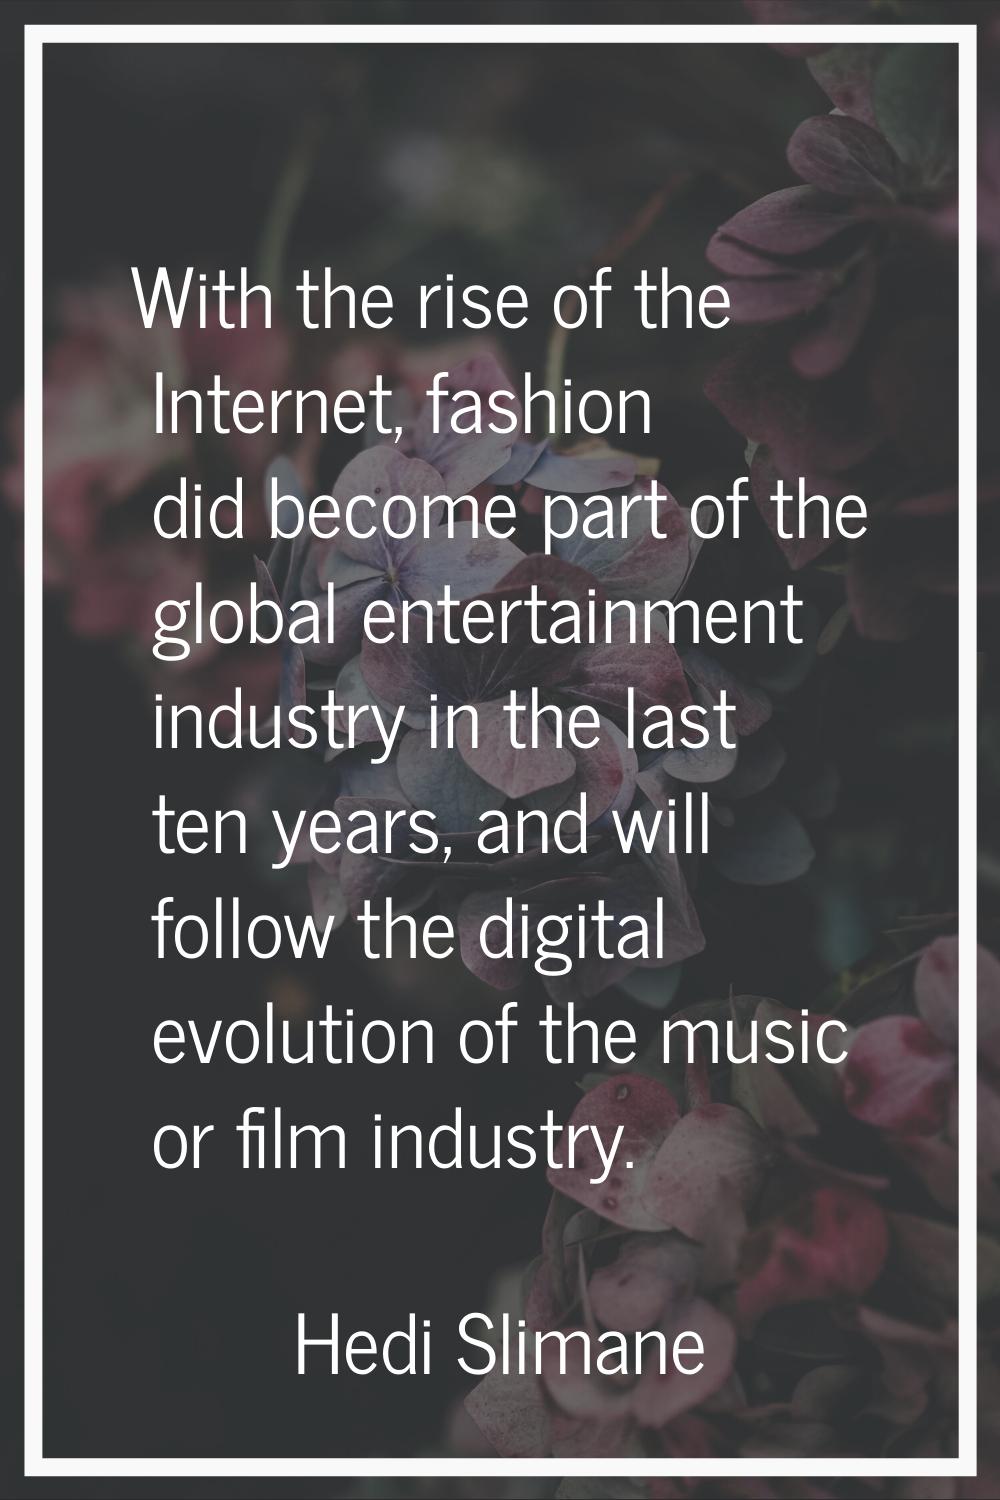 With the rise of the Internet, fashion did become part of the global entertainment industry in the 